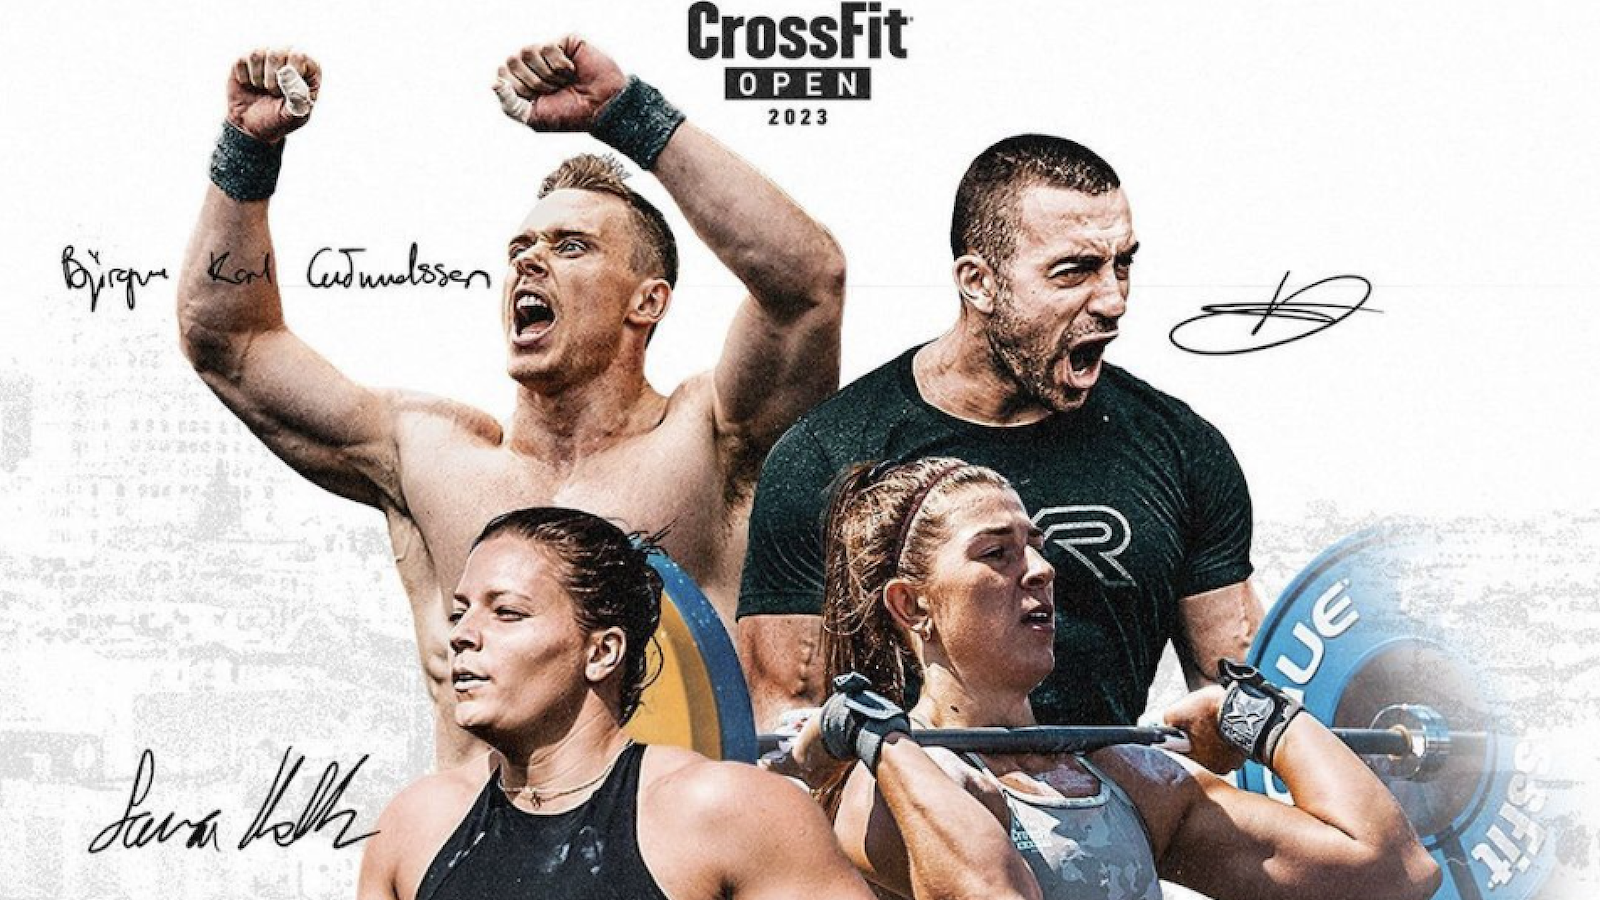 2023 CrossFit Open Exercise 23.1 To Be Introduced On Feb. 16, 2023